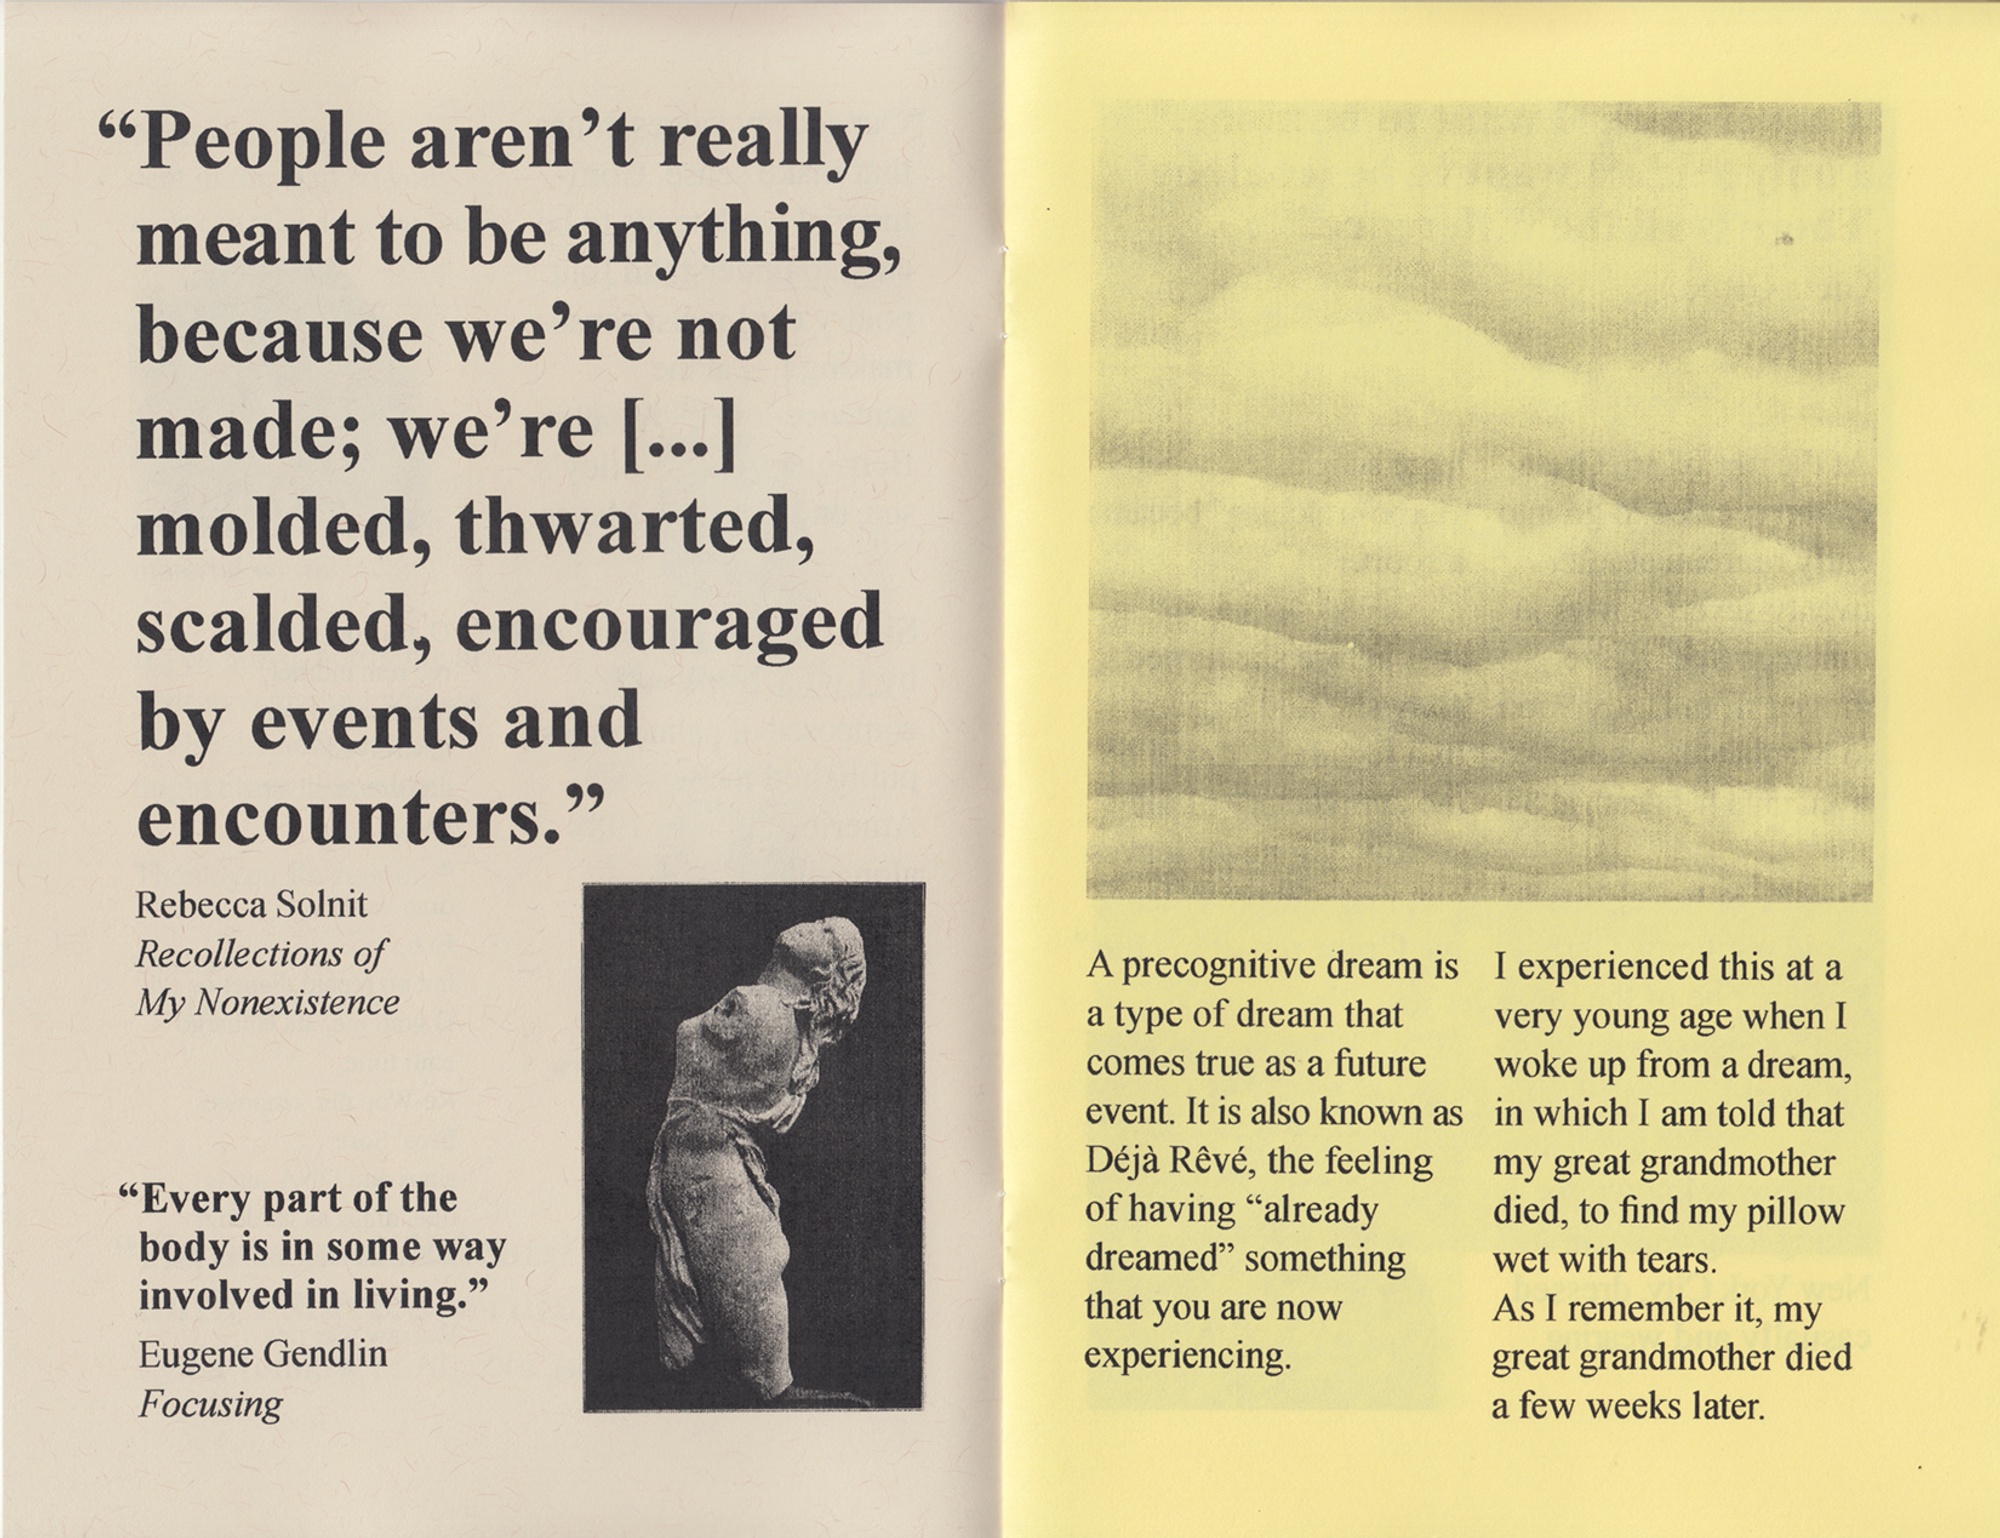 two page spread with large quote by rebecca solnit about how people aren't meant to be anything